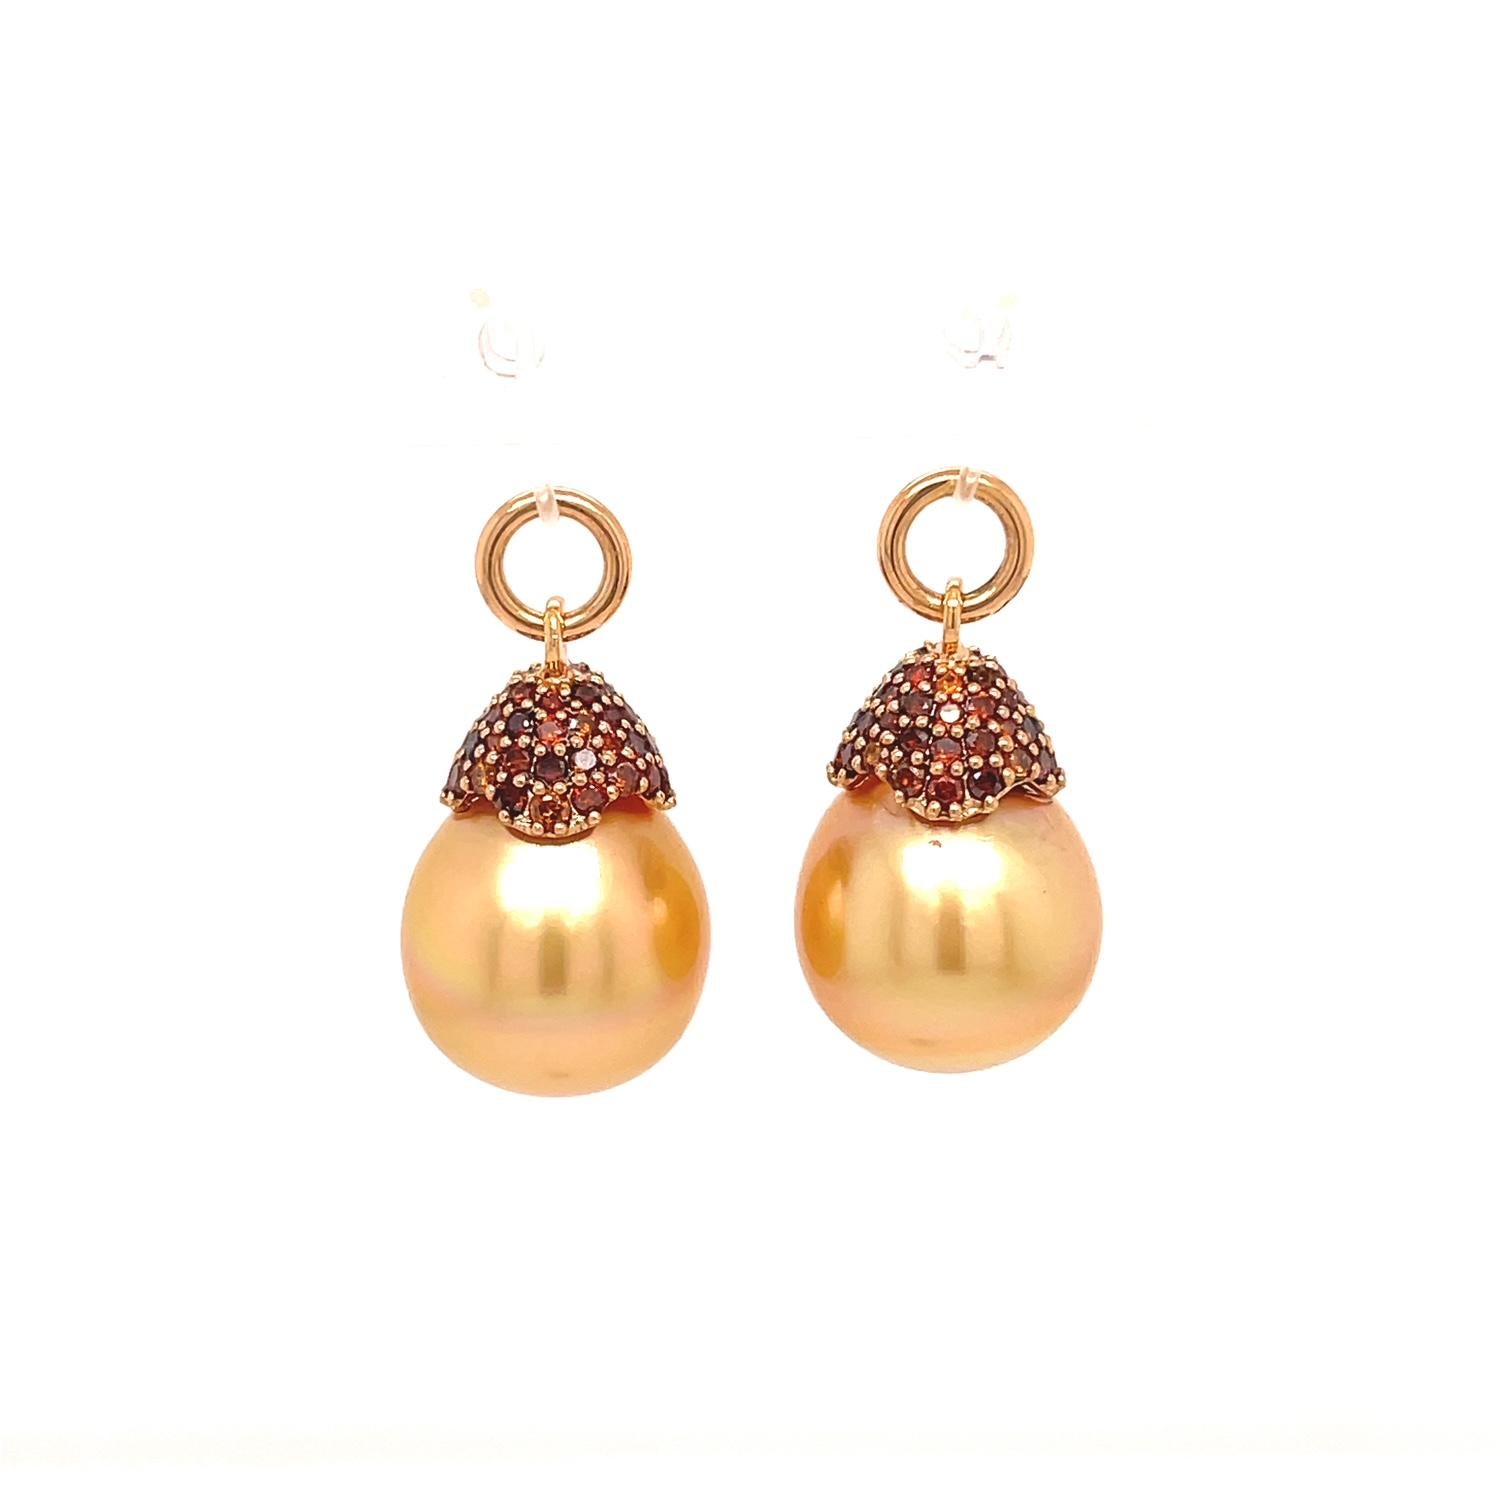 A pair of 18k rose gold studs bezel set with 1.57 total carat weight round rose cut brown diamonds, with a pair of 12x15.5mm golden south sea pearls with an 18k rose gold cap set with 104 cabernet colored diamonds, .86tcw. These earrings were made